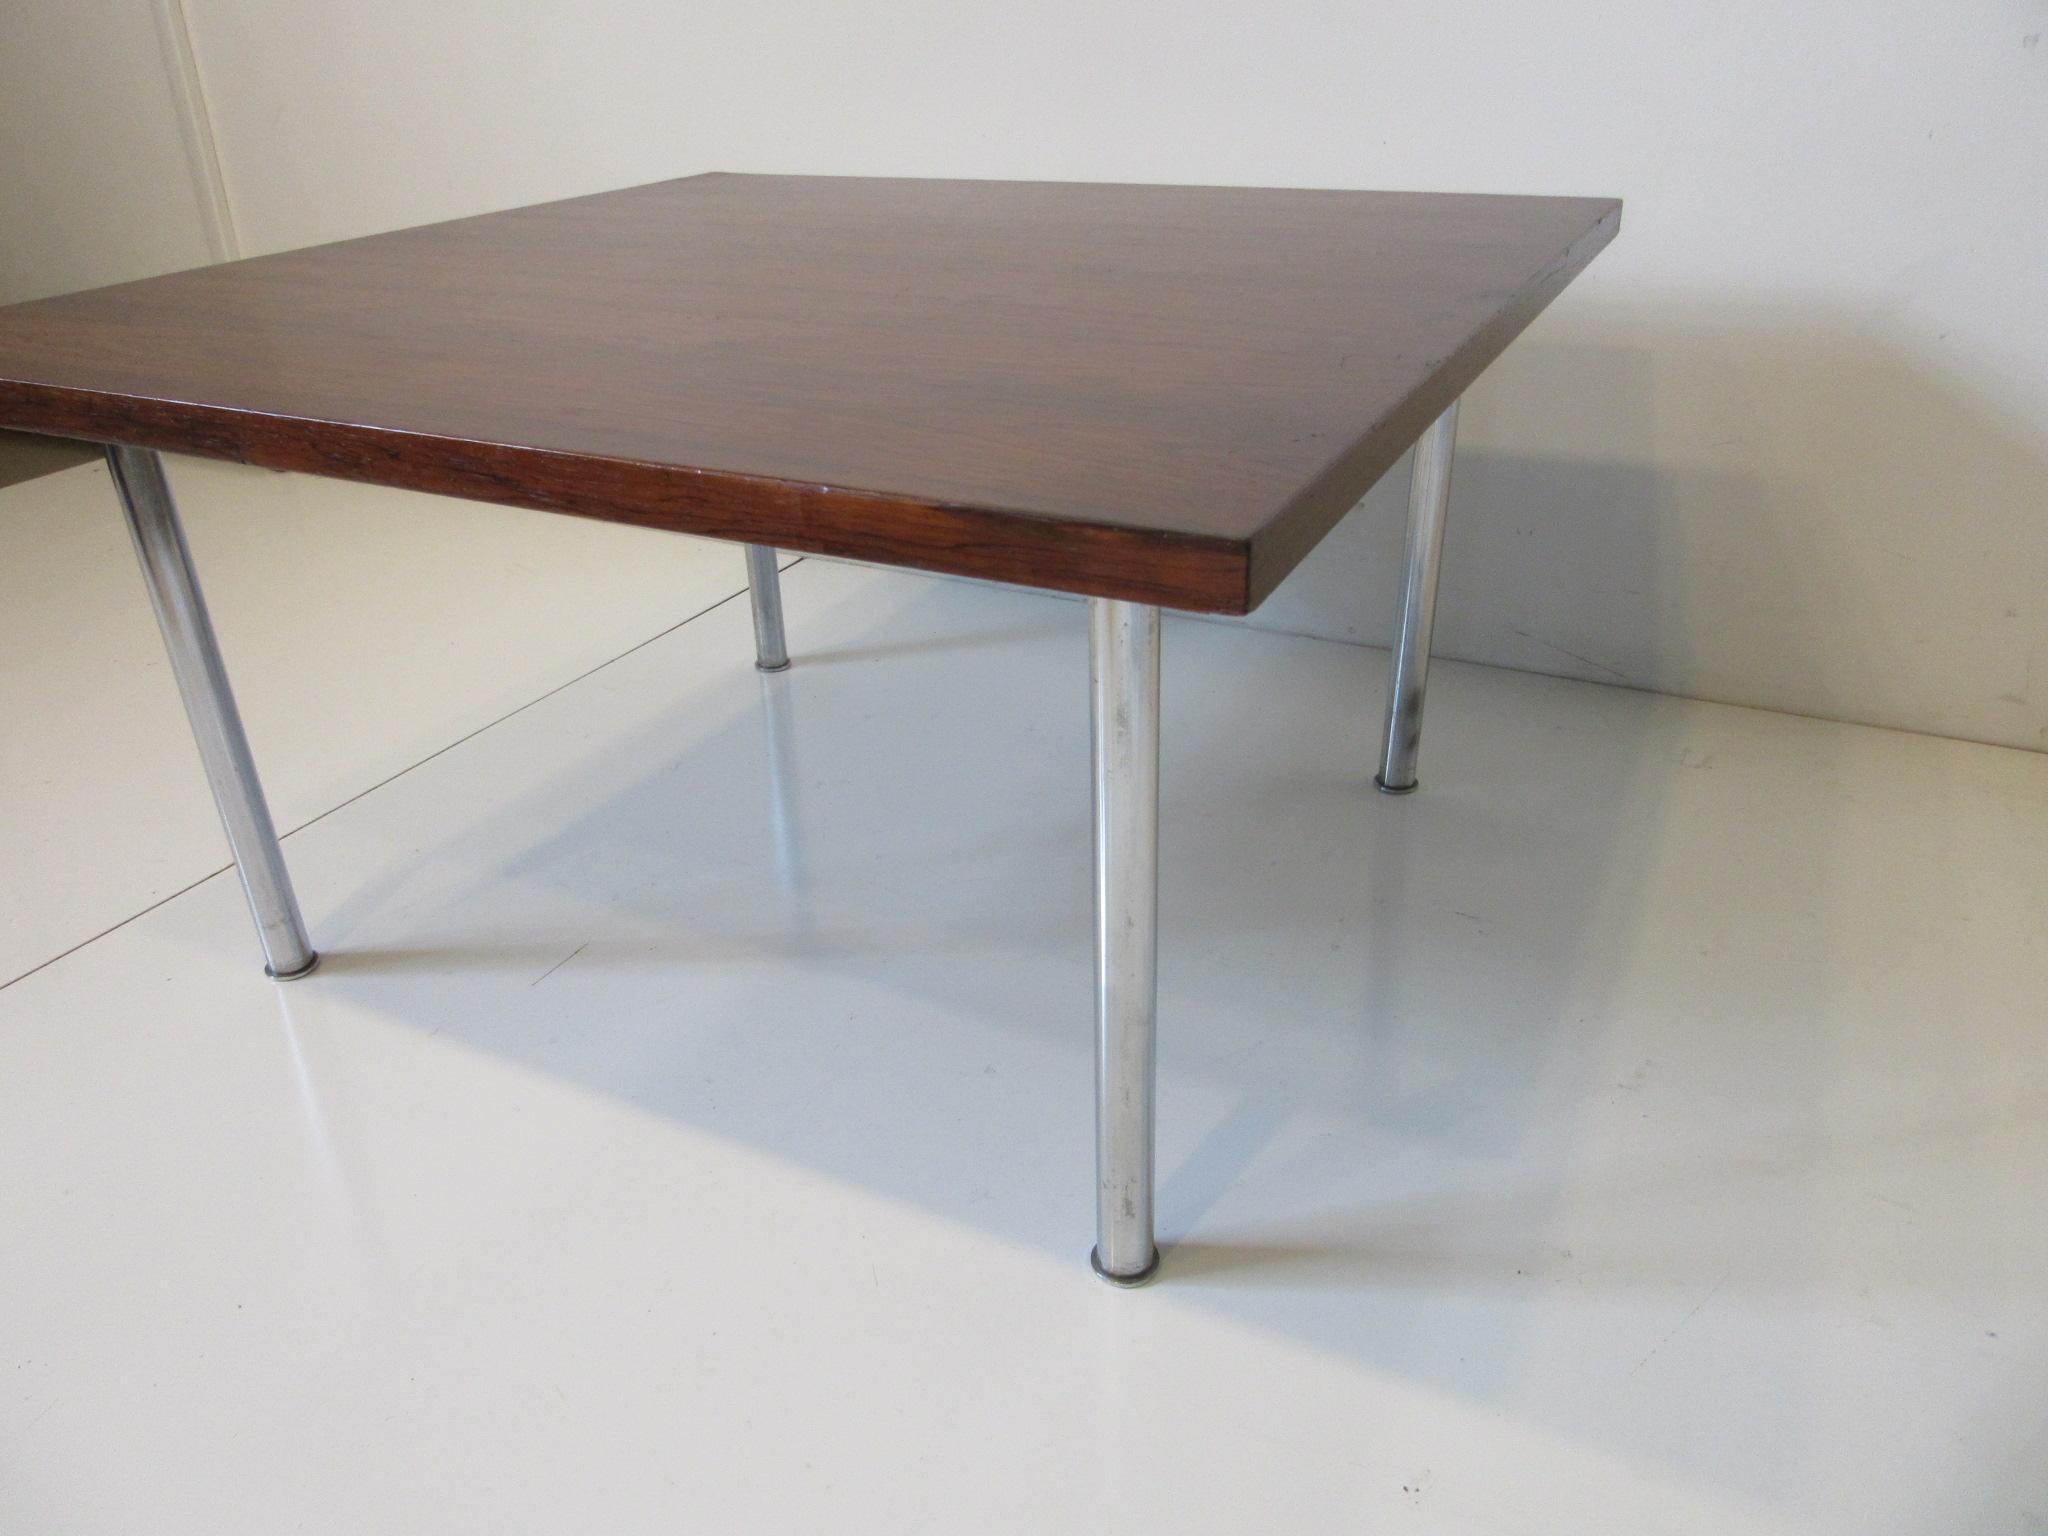 Danish Rosewood Coffee Table by Bodil kjaer for E. Pedersen & Sons, Denmark In Good Condition For Sale In Cincinnati, OH